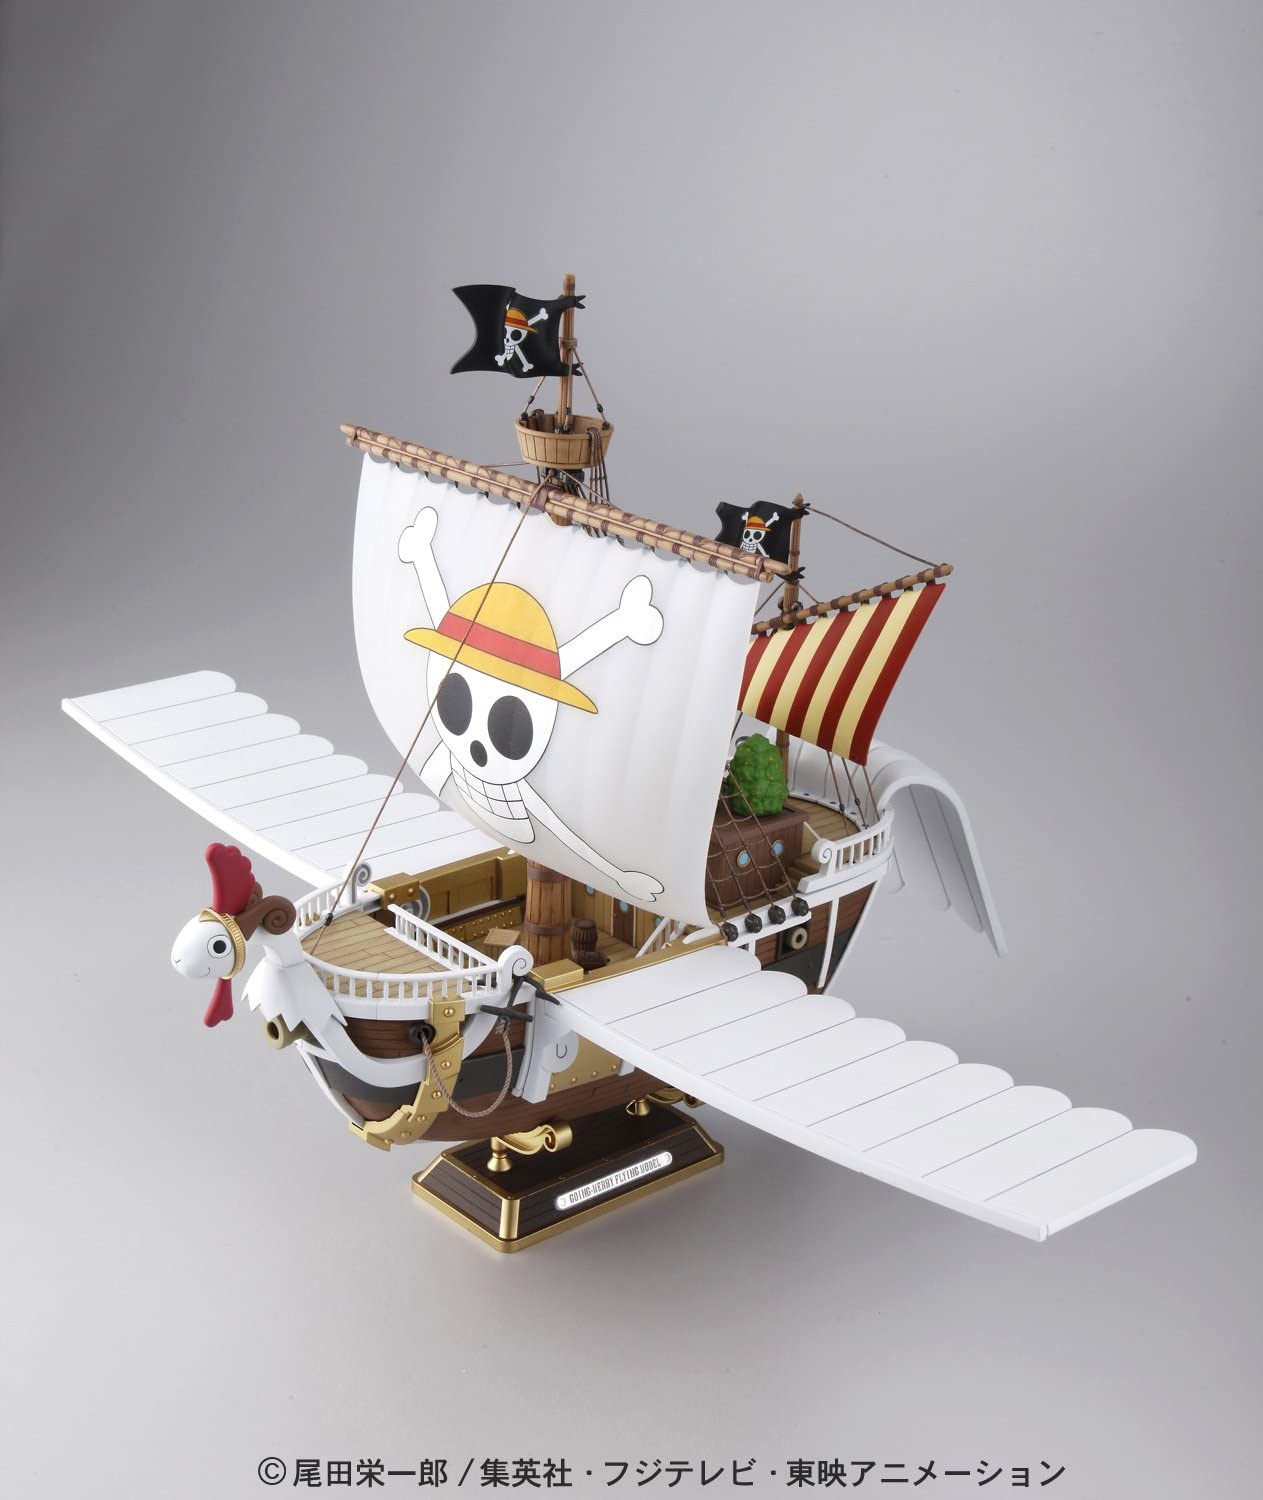 One Piece - Going Merry Flying Model